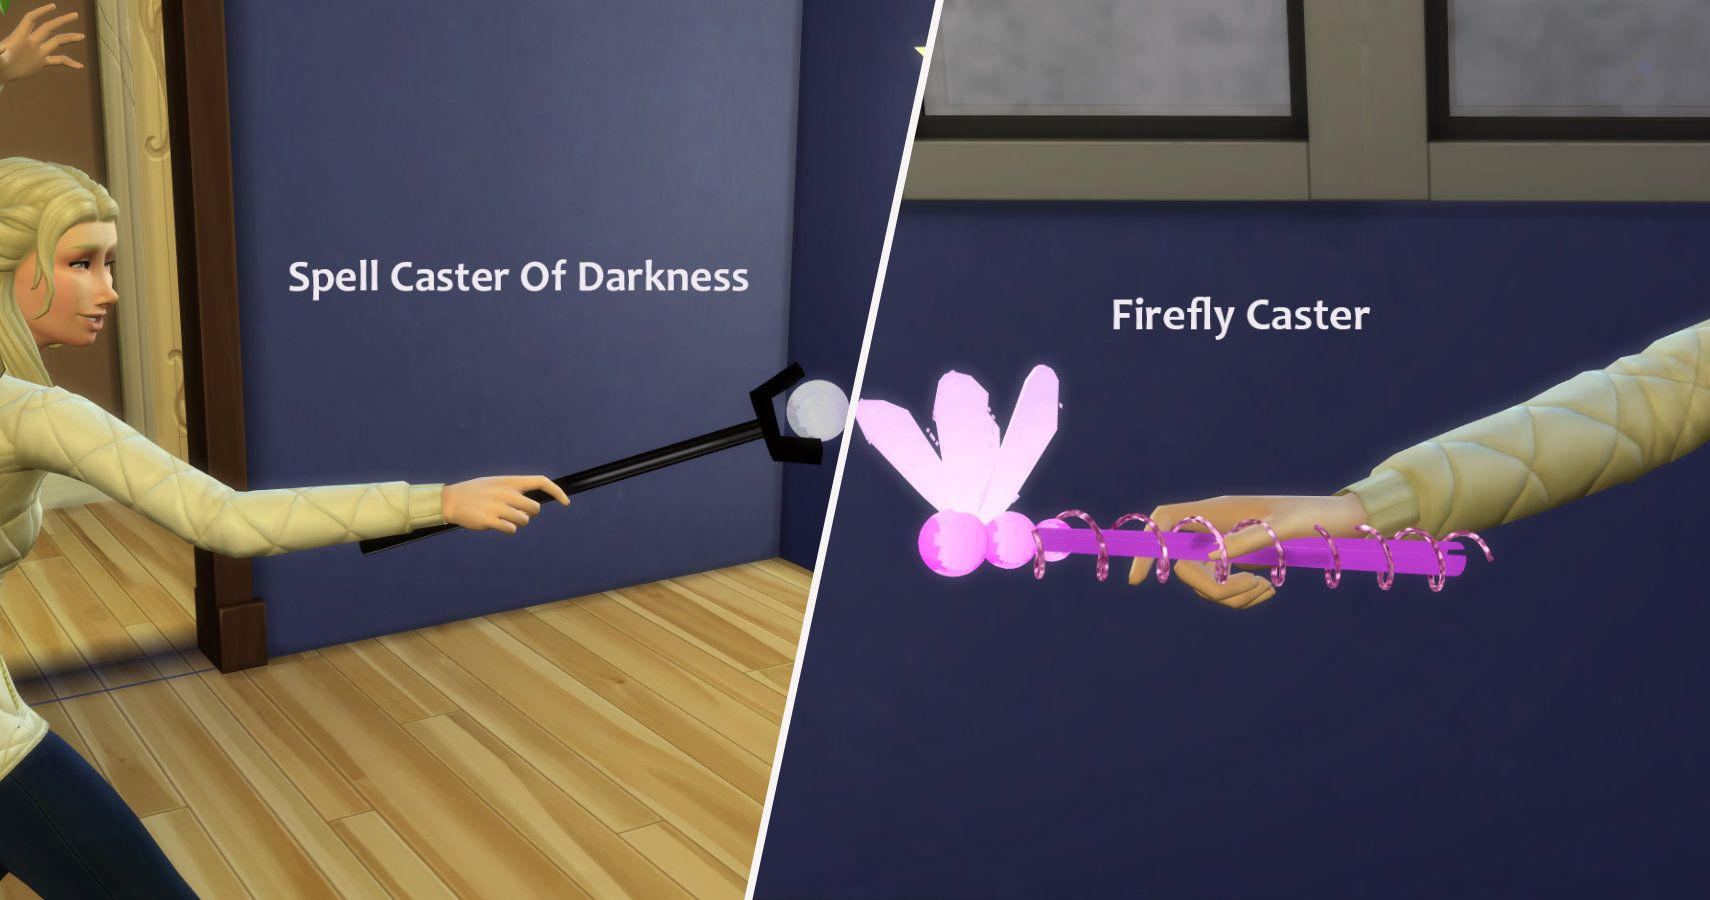 SPlit image left side a dark black wand, right side a pink firefly wand.